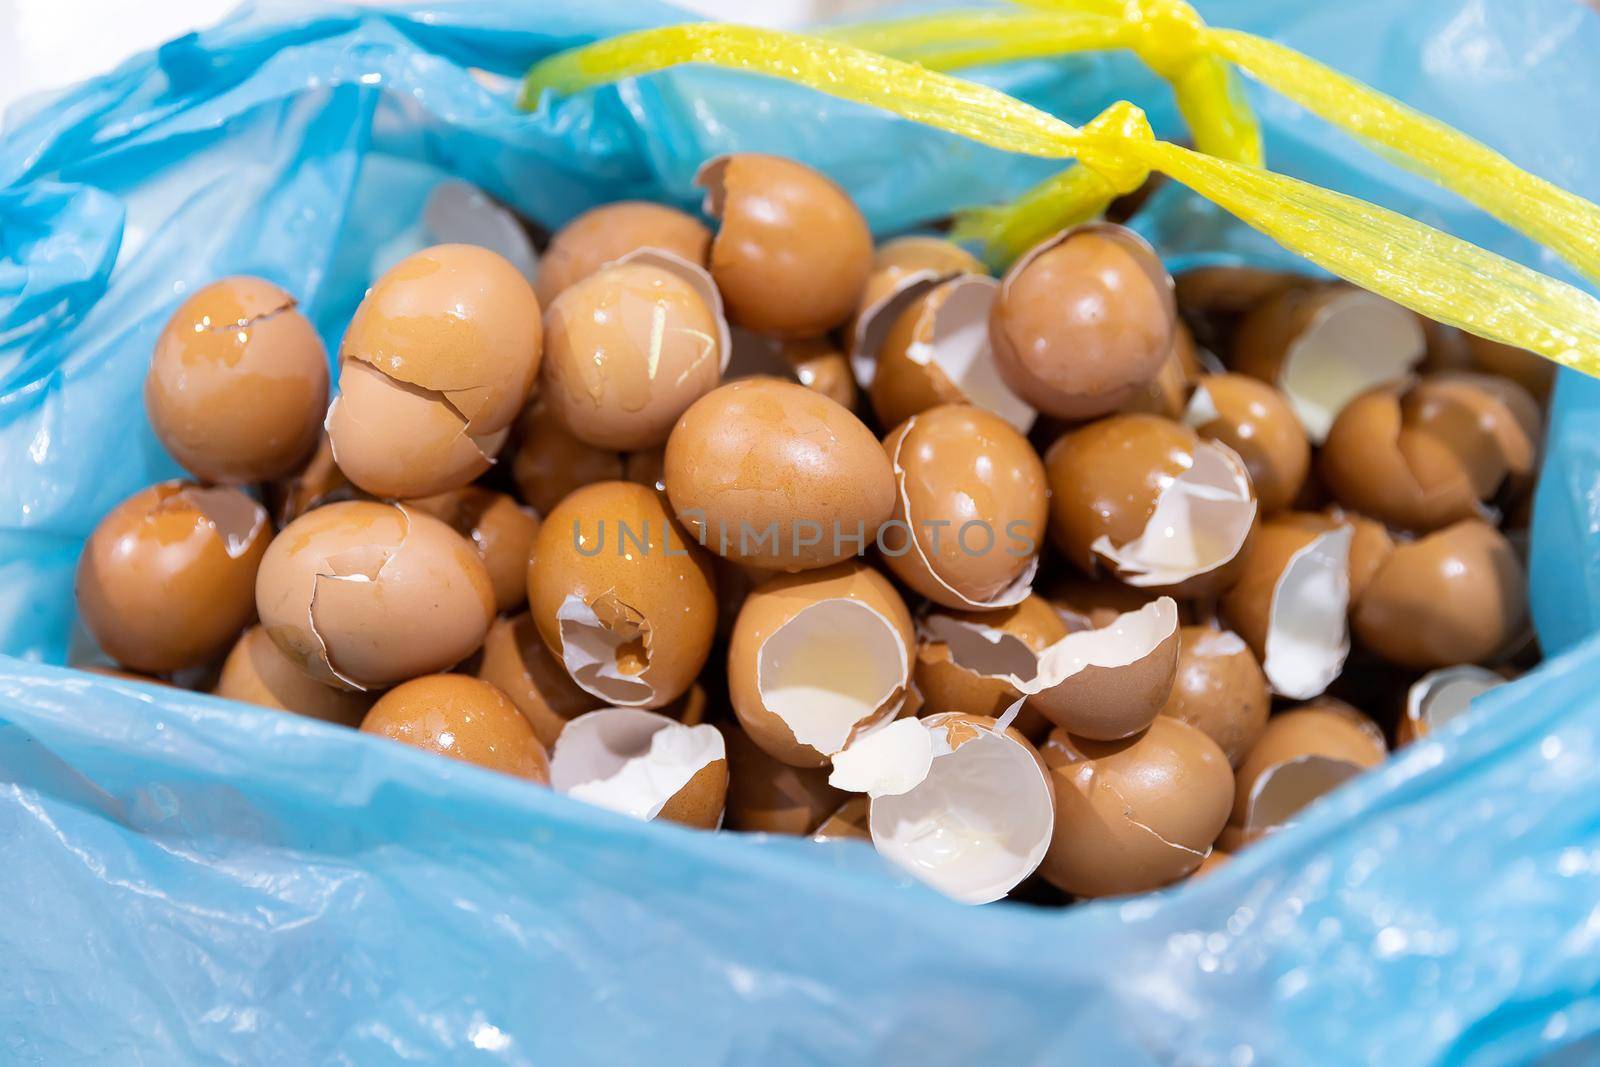 Chicken eggshell fragments by smuay